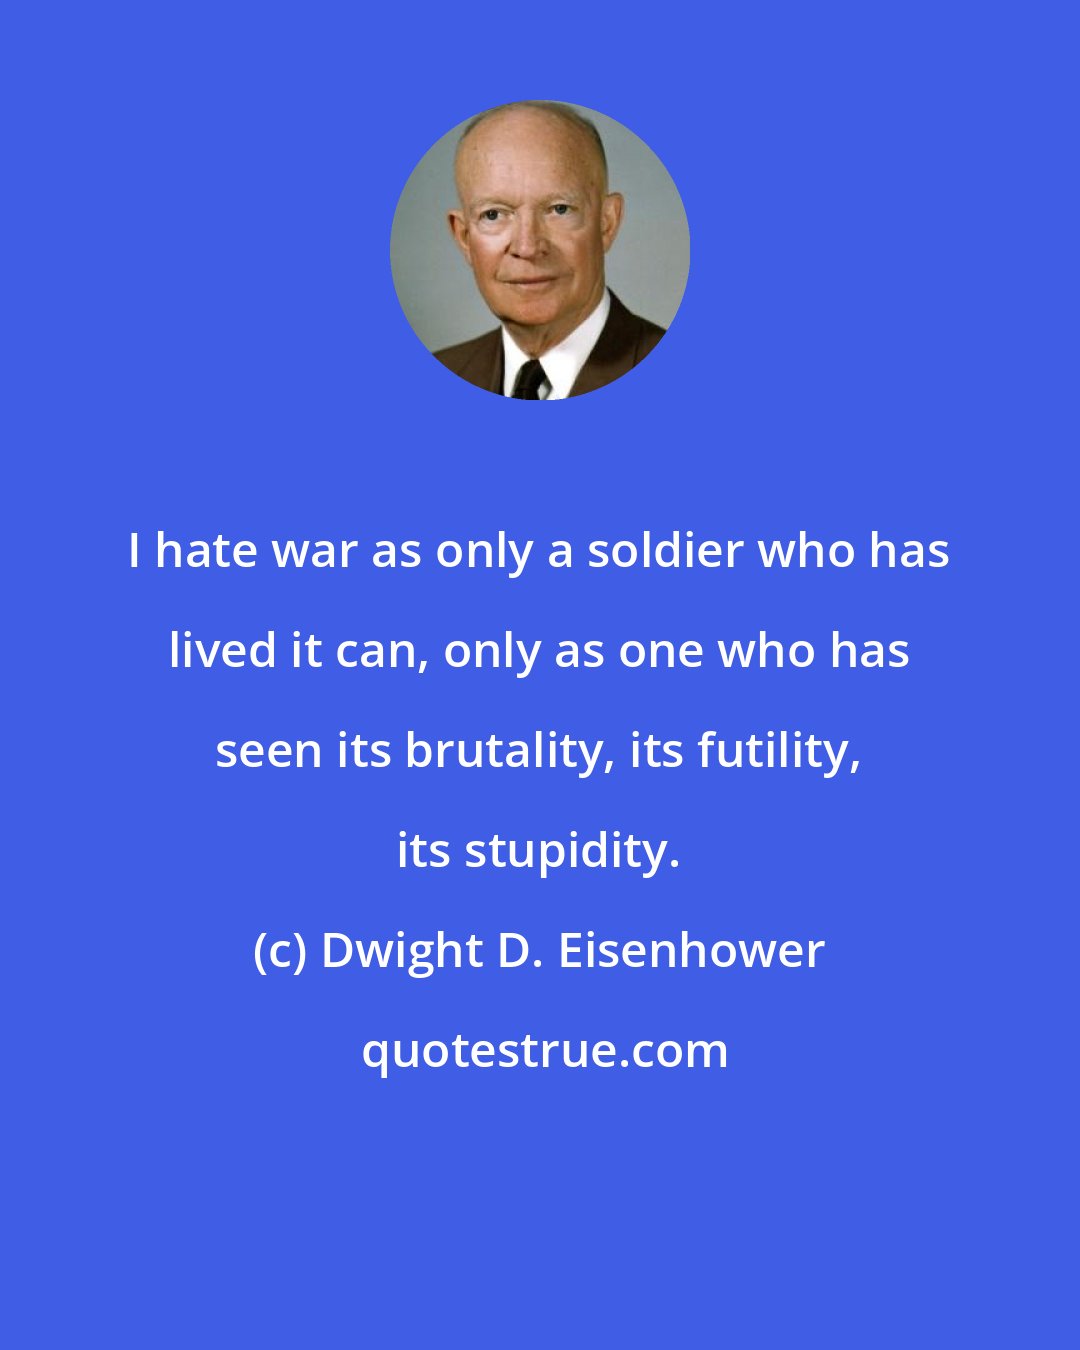 Dwight D. Eisenhower: I hate war as only a soldier who has lived it can, only as one who has seen its brutality, its futility, its stupidity.